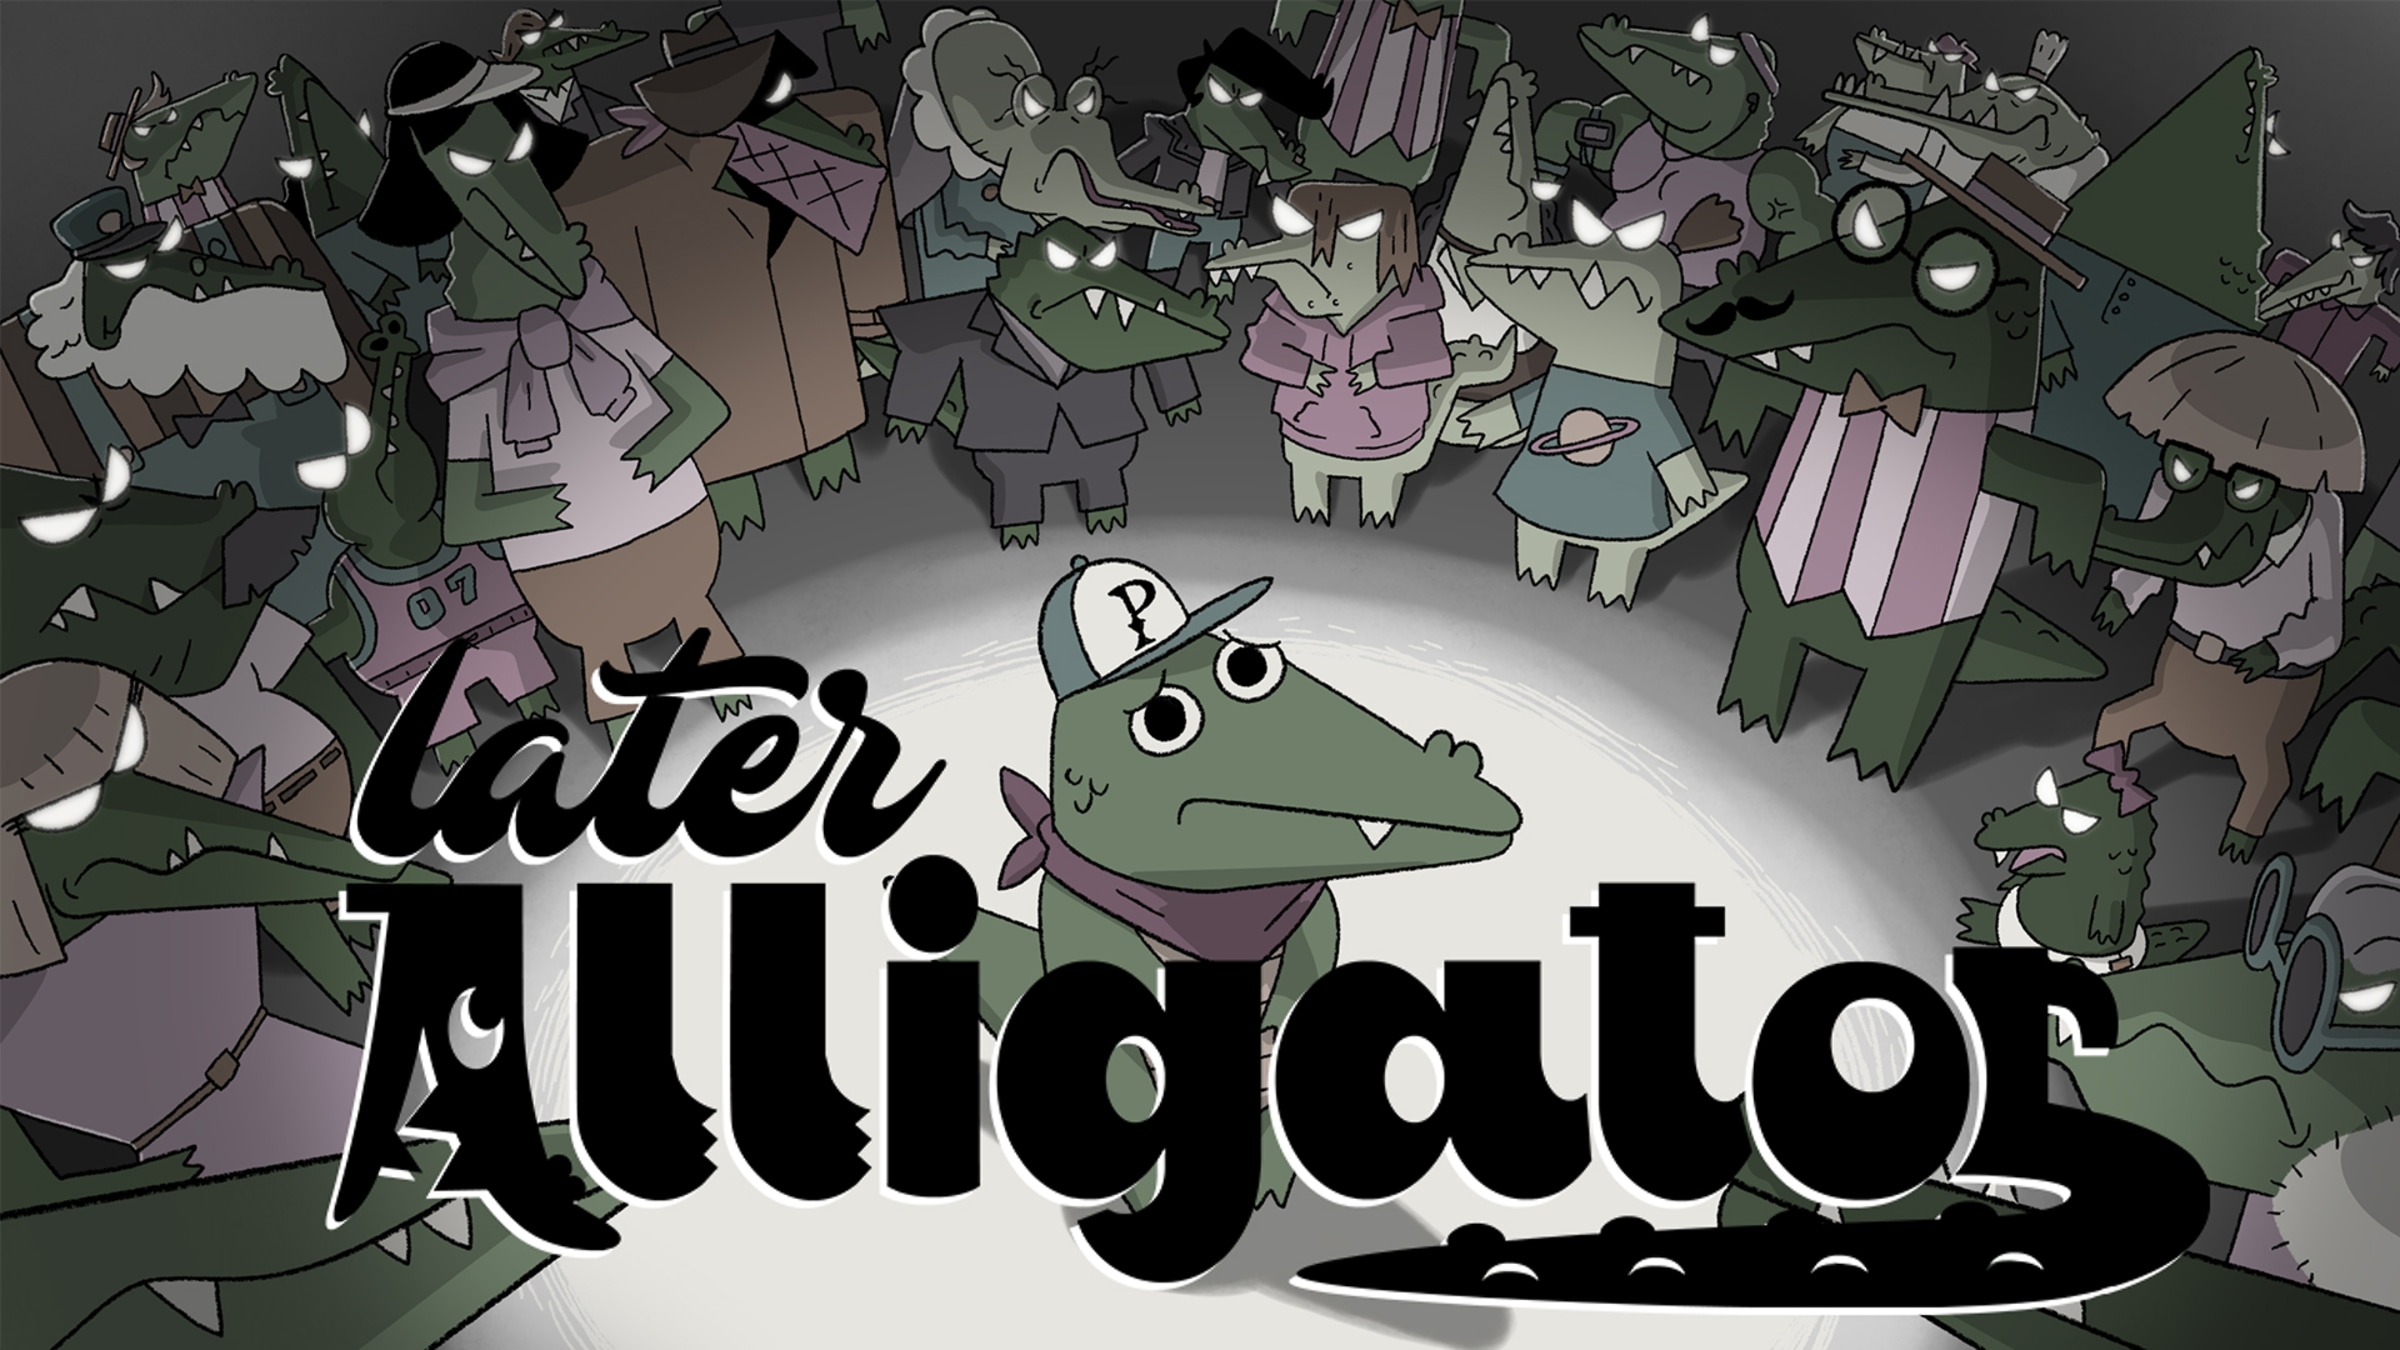 Later Alligator for Nintendo Switch - Nintendo Official Site